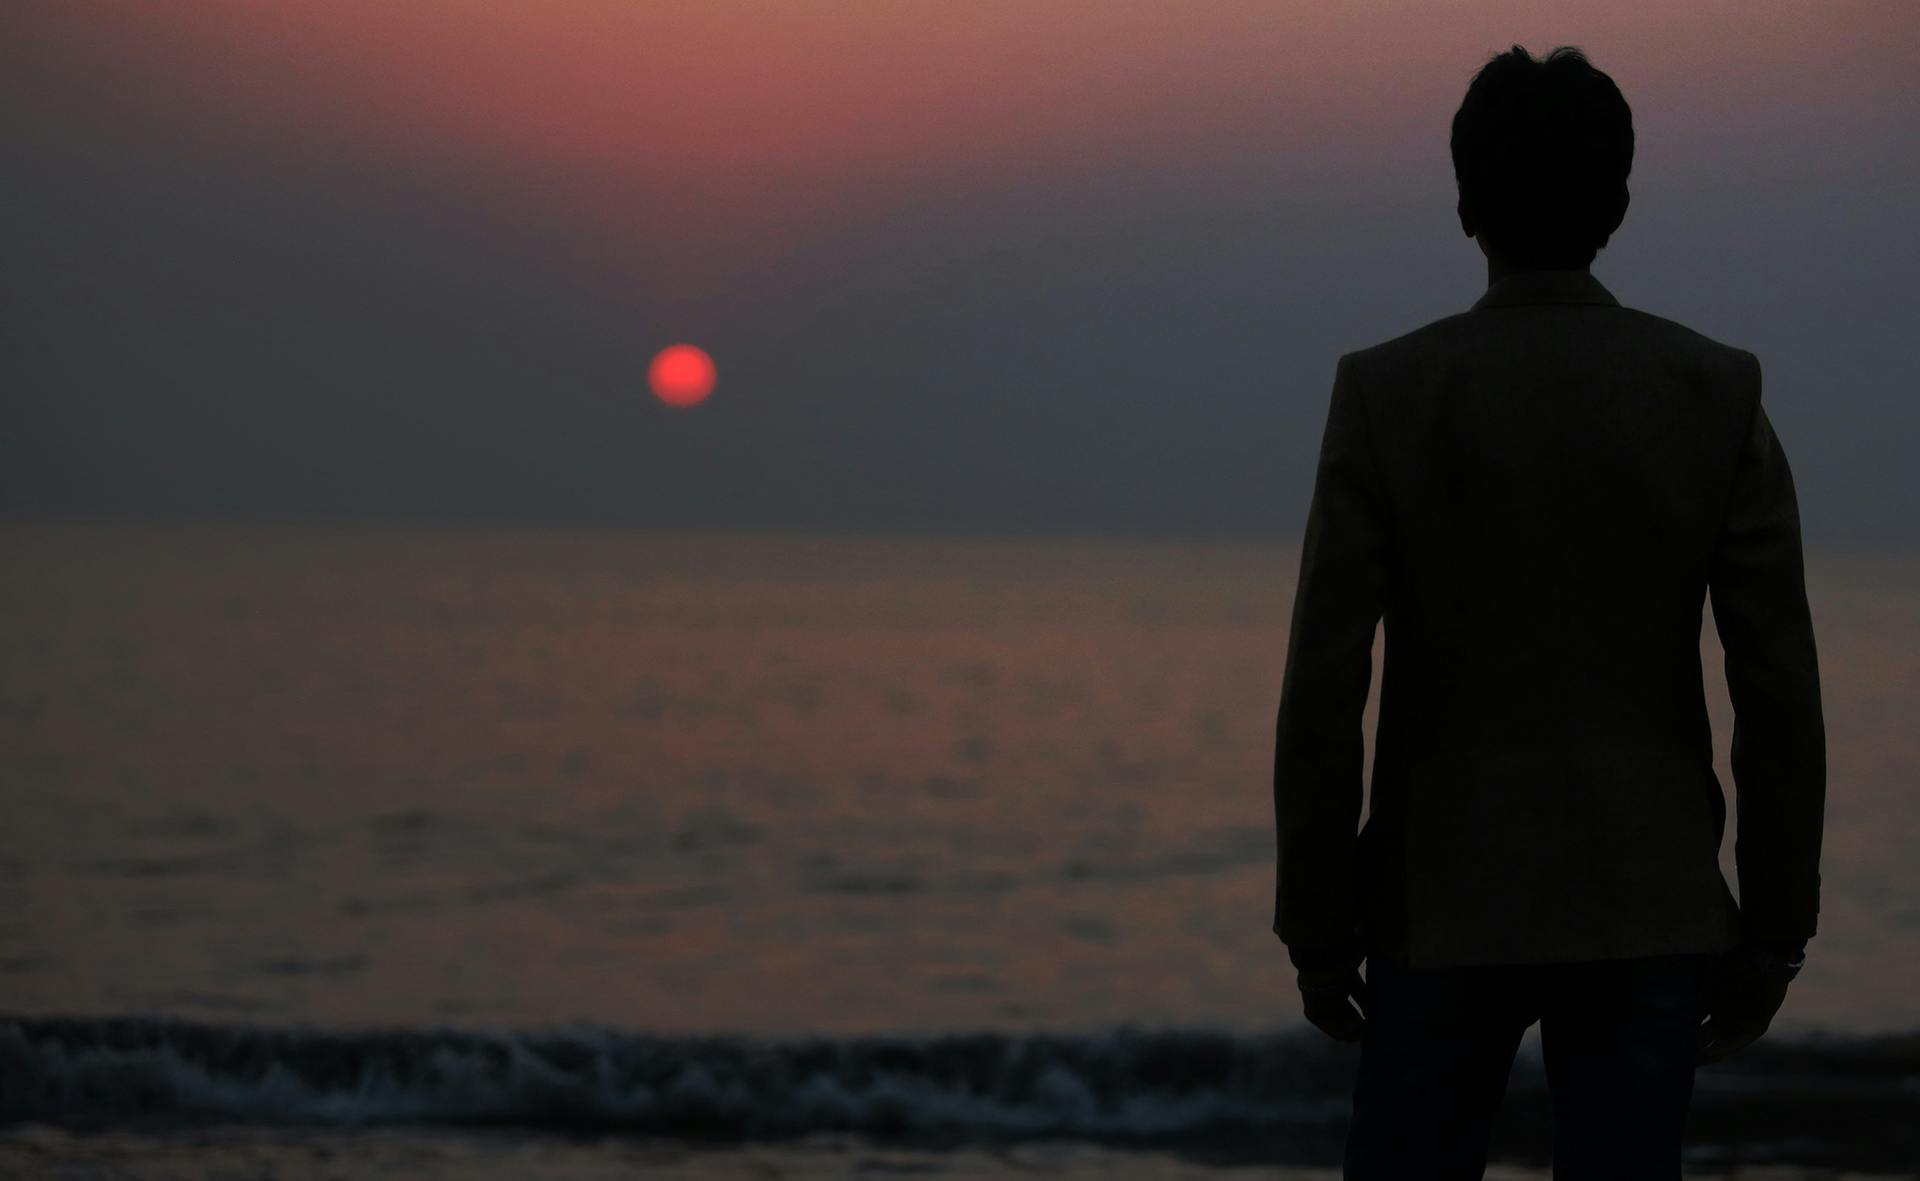 a man standing on top of a beach next to the ocean, an album cover, pexels contest winner, romanticism, at gentle dawn red light, distant thoughtful look, still from a terence malik film, the sun at their back